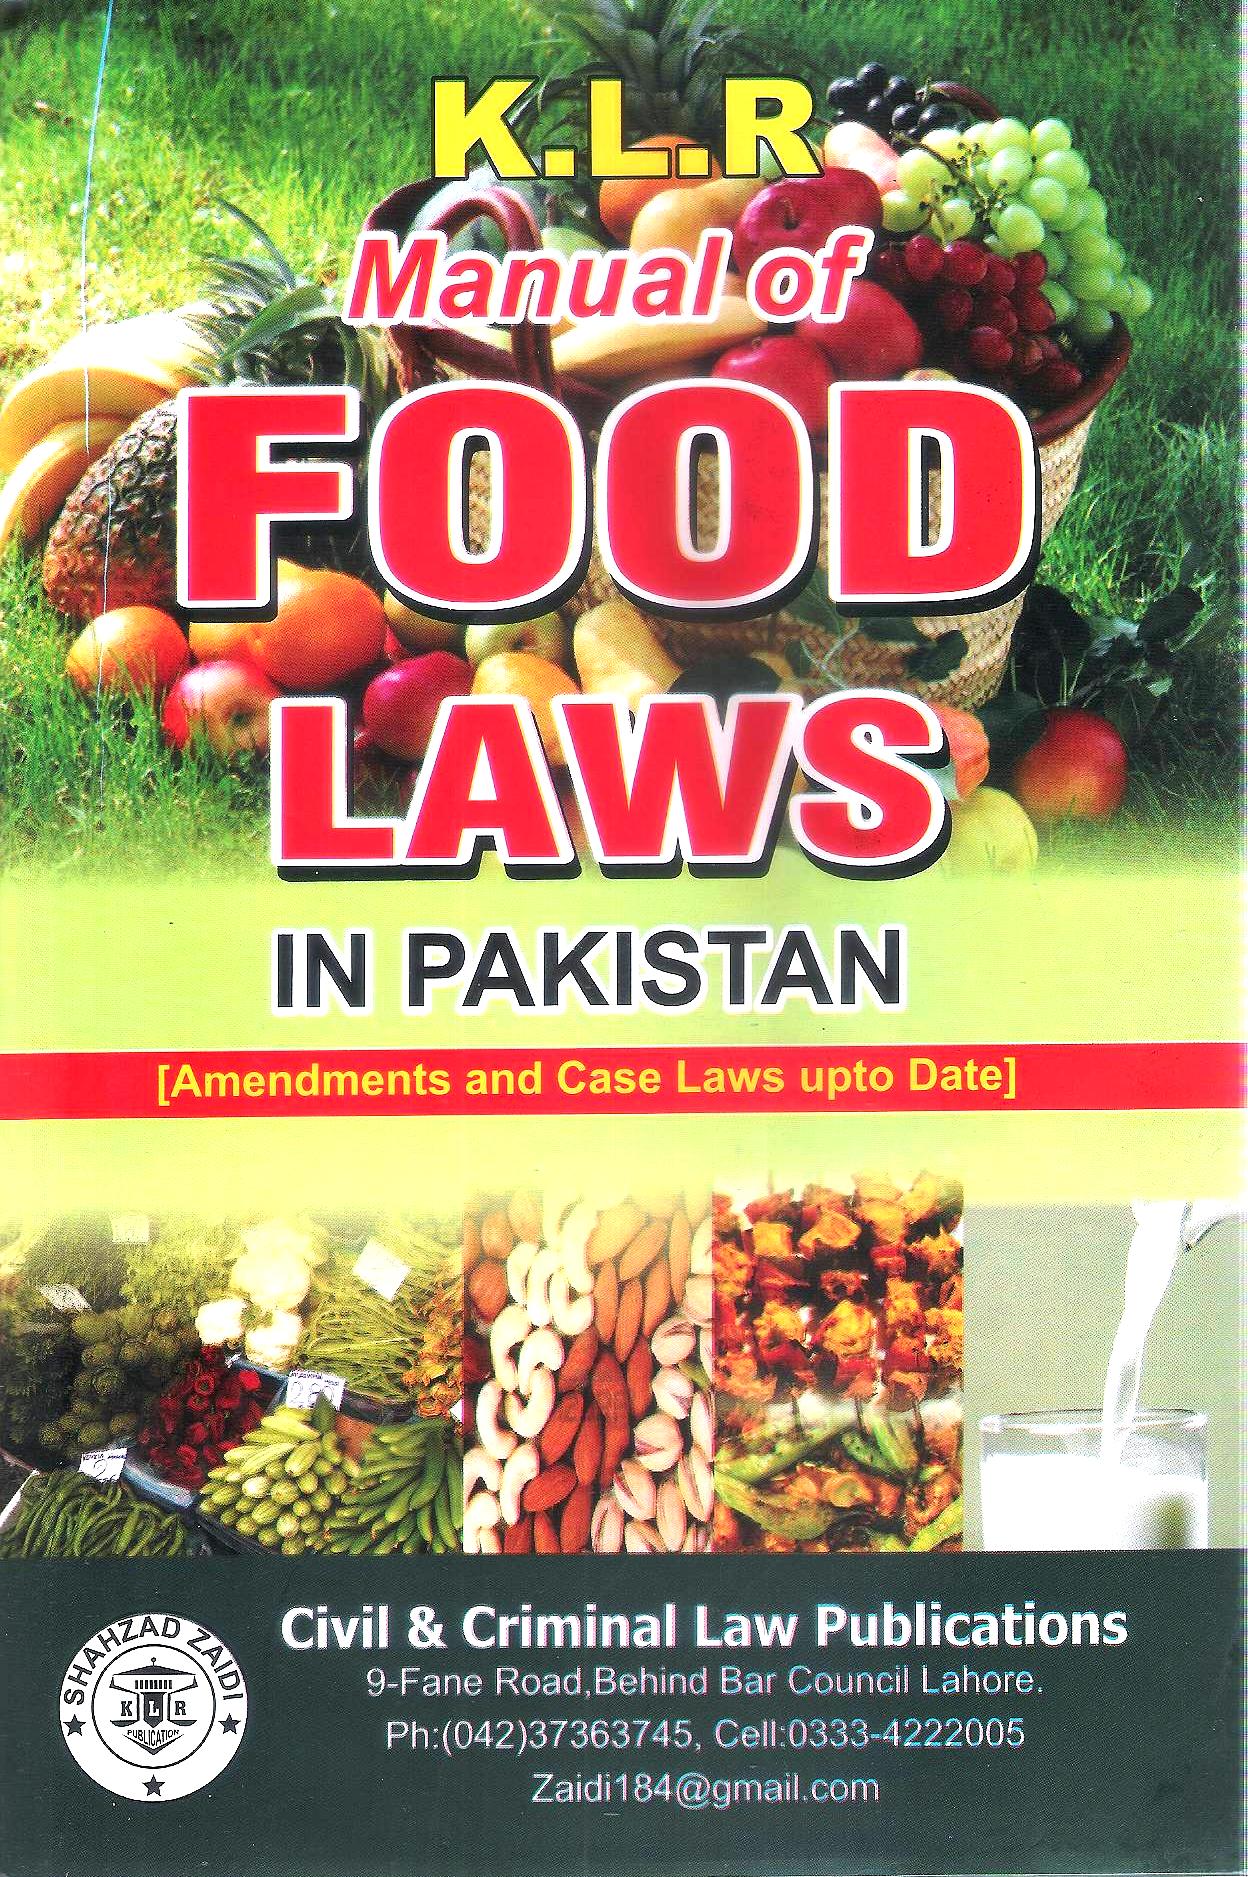 MANUAL OF FOOD LAWS IN PAKISTAN - MANZOOR LAW BOOK HOUSE